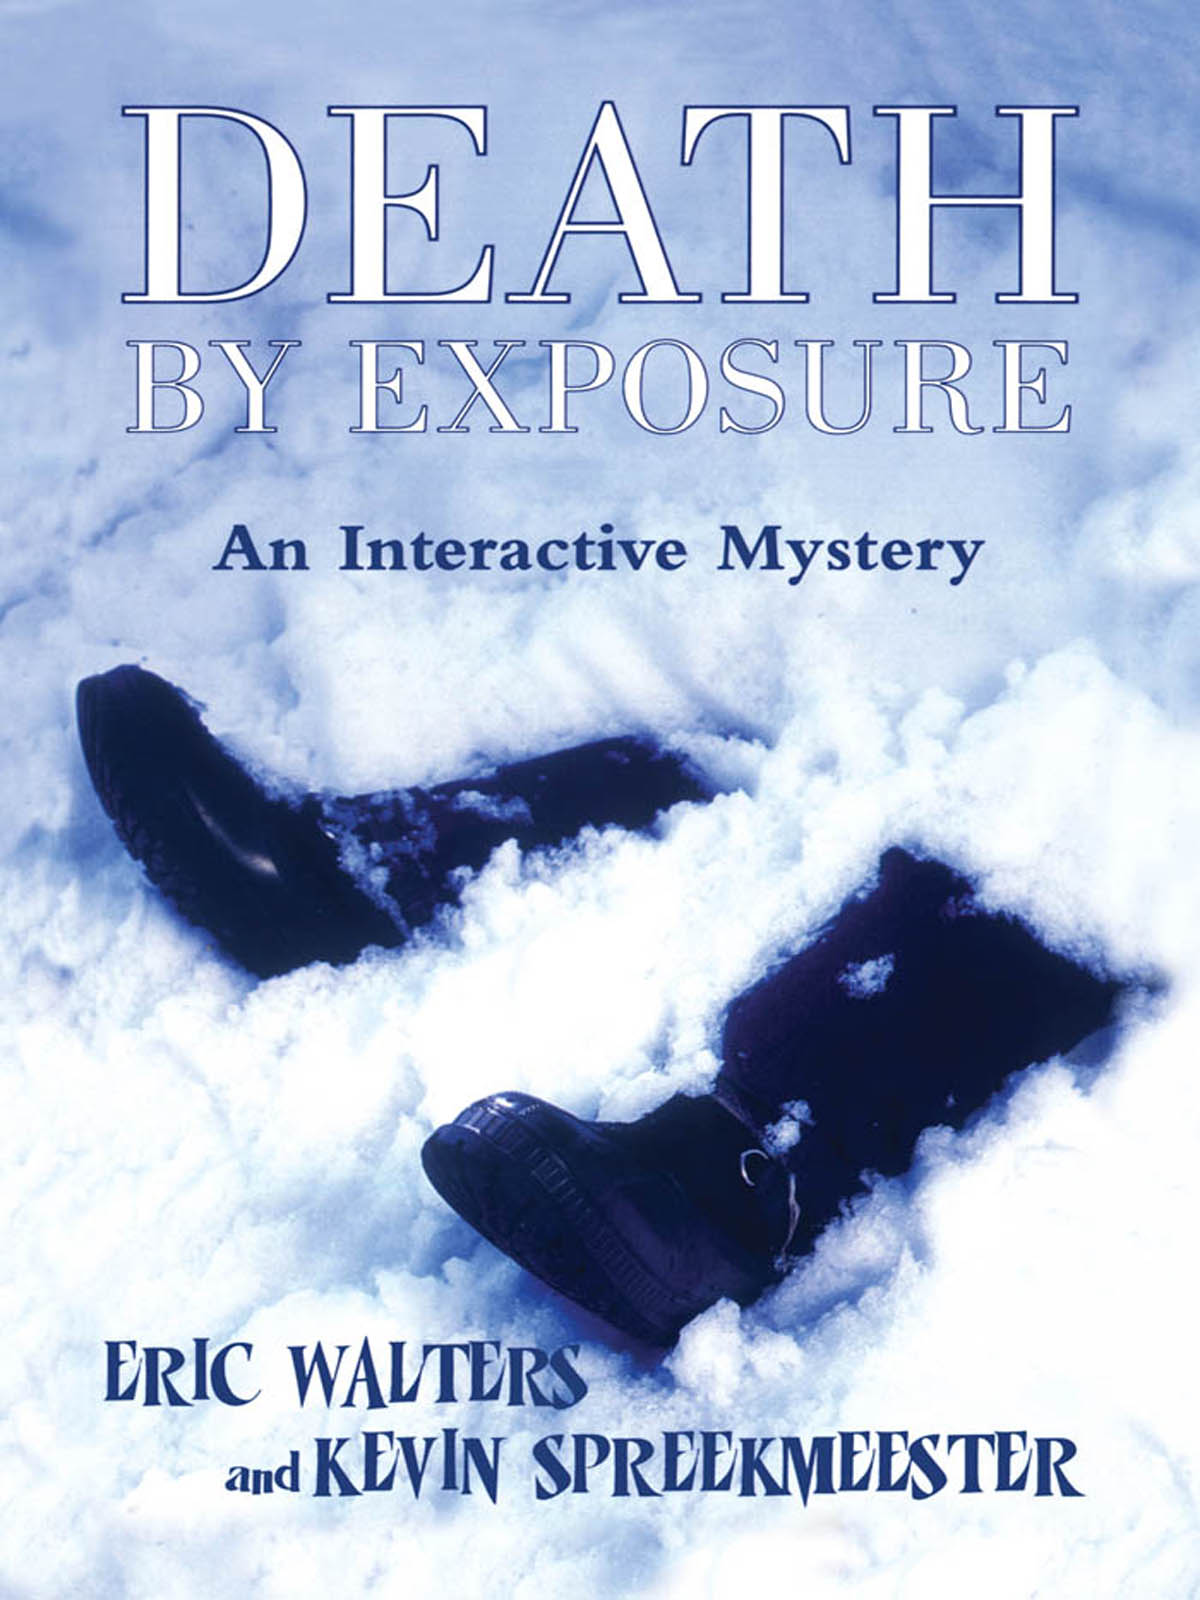 Death by Exposure by Eric Walters